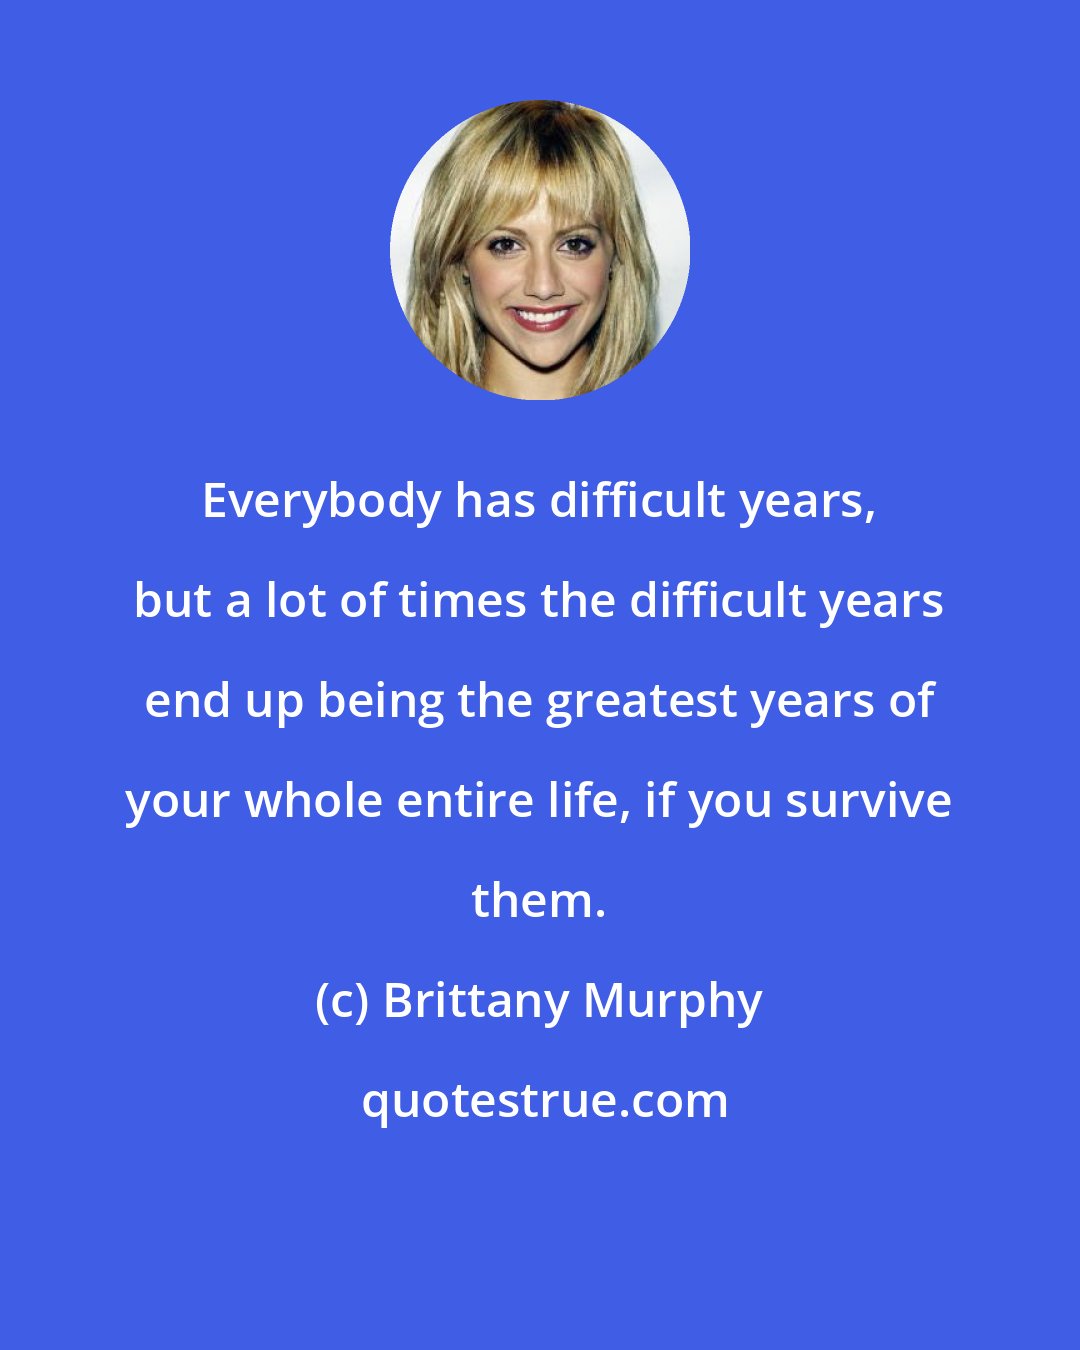 Brittany Murphy: Everybody has difficult years, but a lot of times the difficult years end up being the greatest years of your whole entire life, if you survive them.